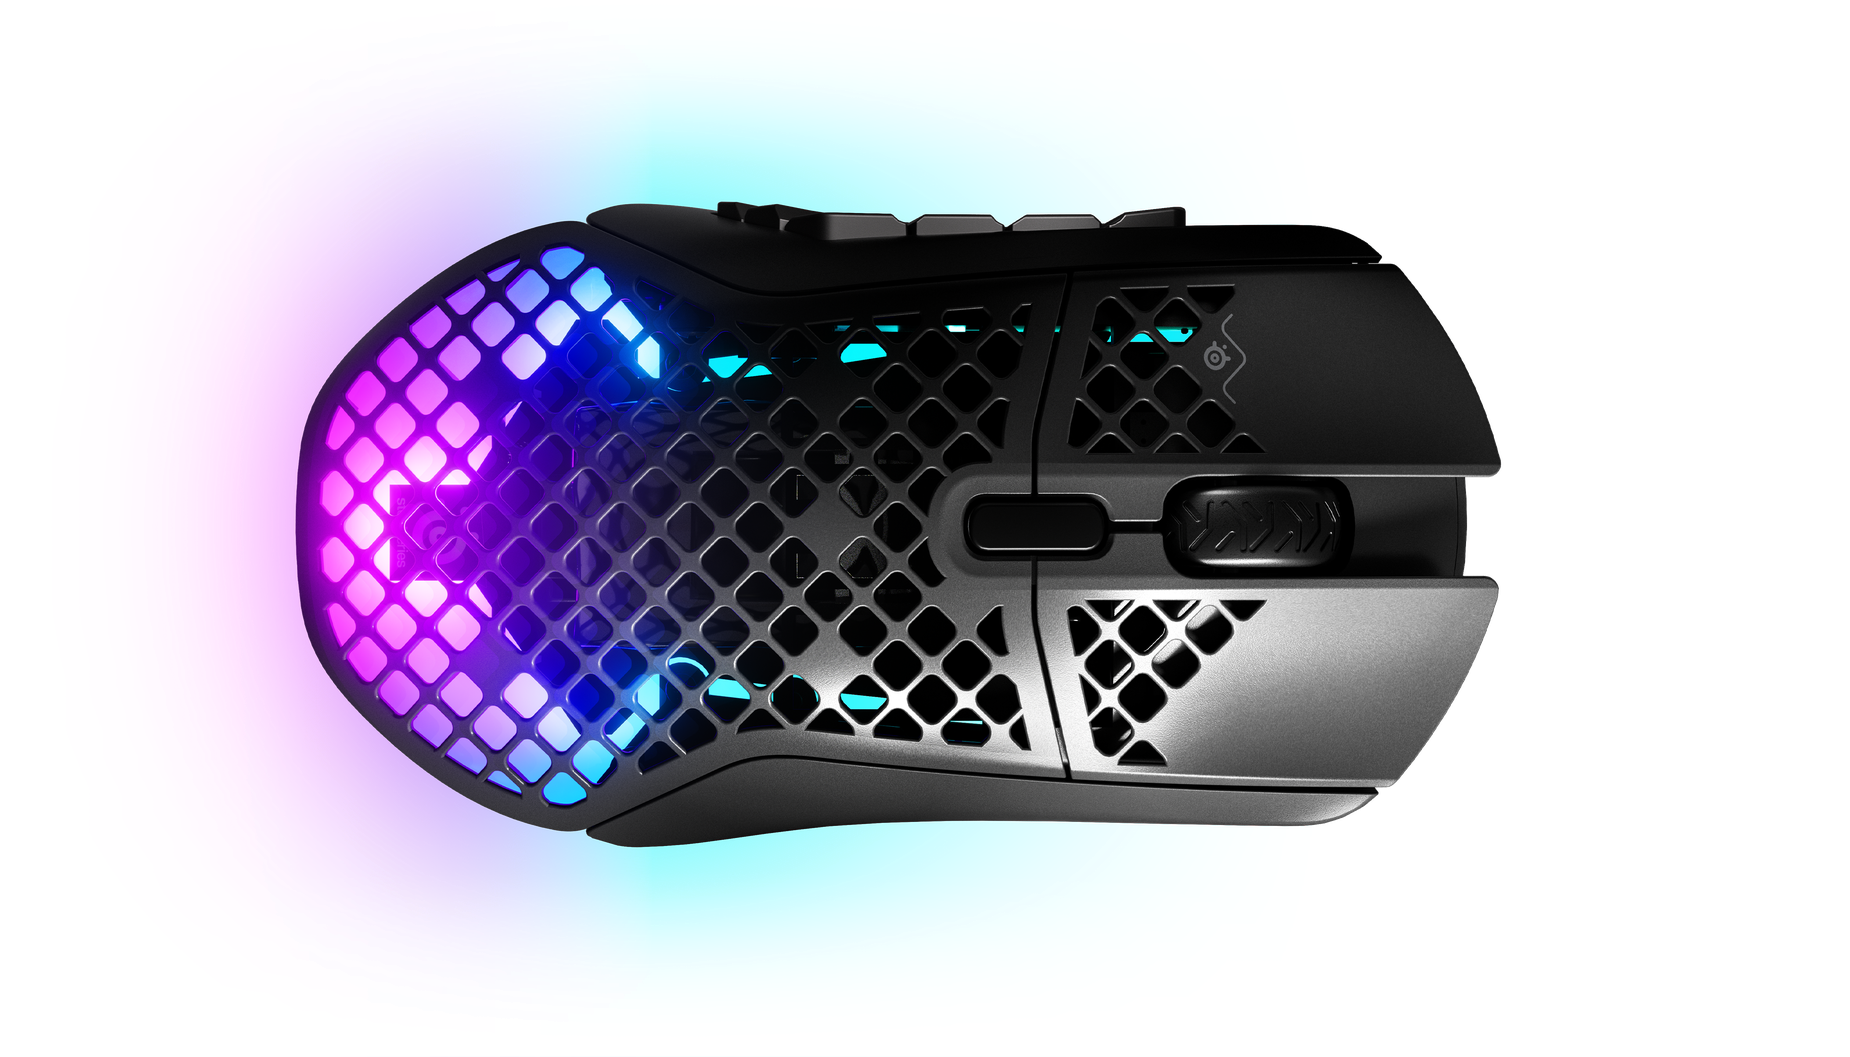 
 A top-down view of the Aerox 9 Wireless mouse.
 